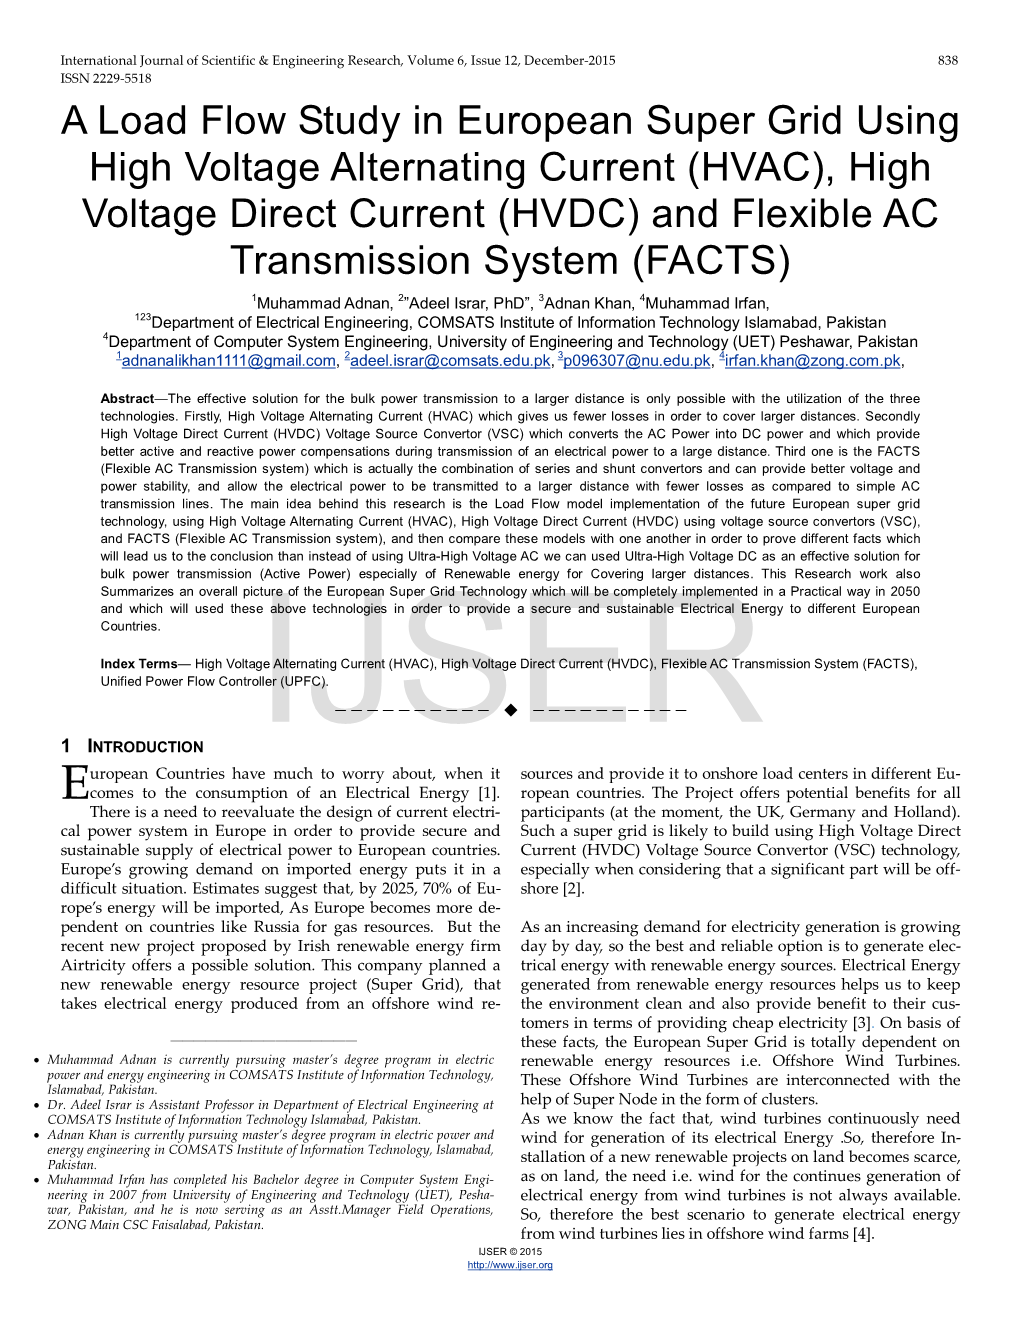 A Load Flow Study in European Super Grid Using High Voltage